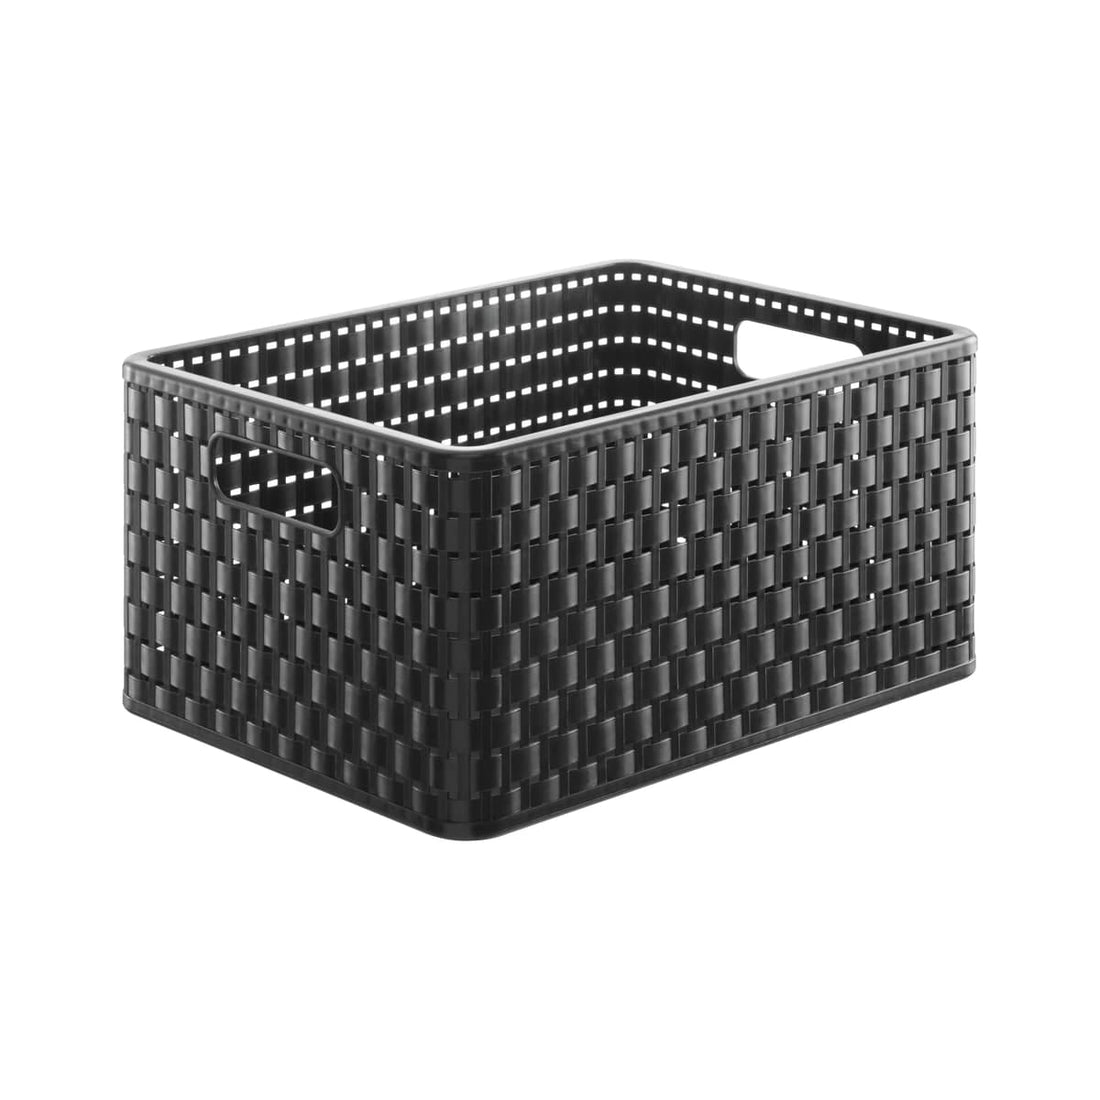 COUNTRY BASKET A4 36.8X27.8X19.1 CM ANTHRACITE - best price from Maltashopper.com BR410005873